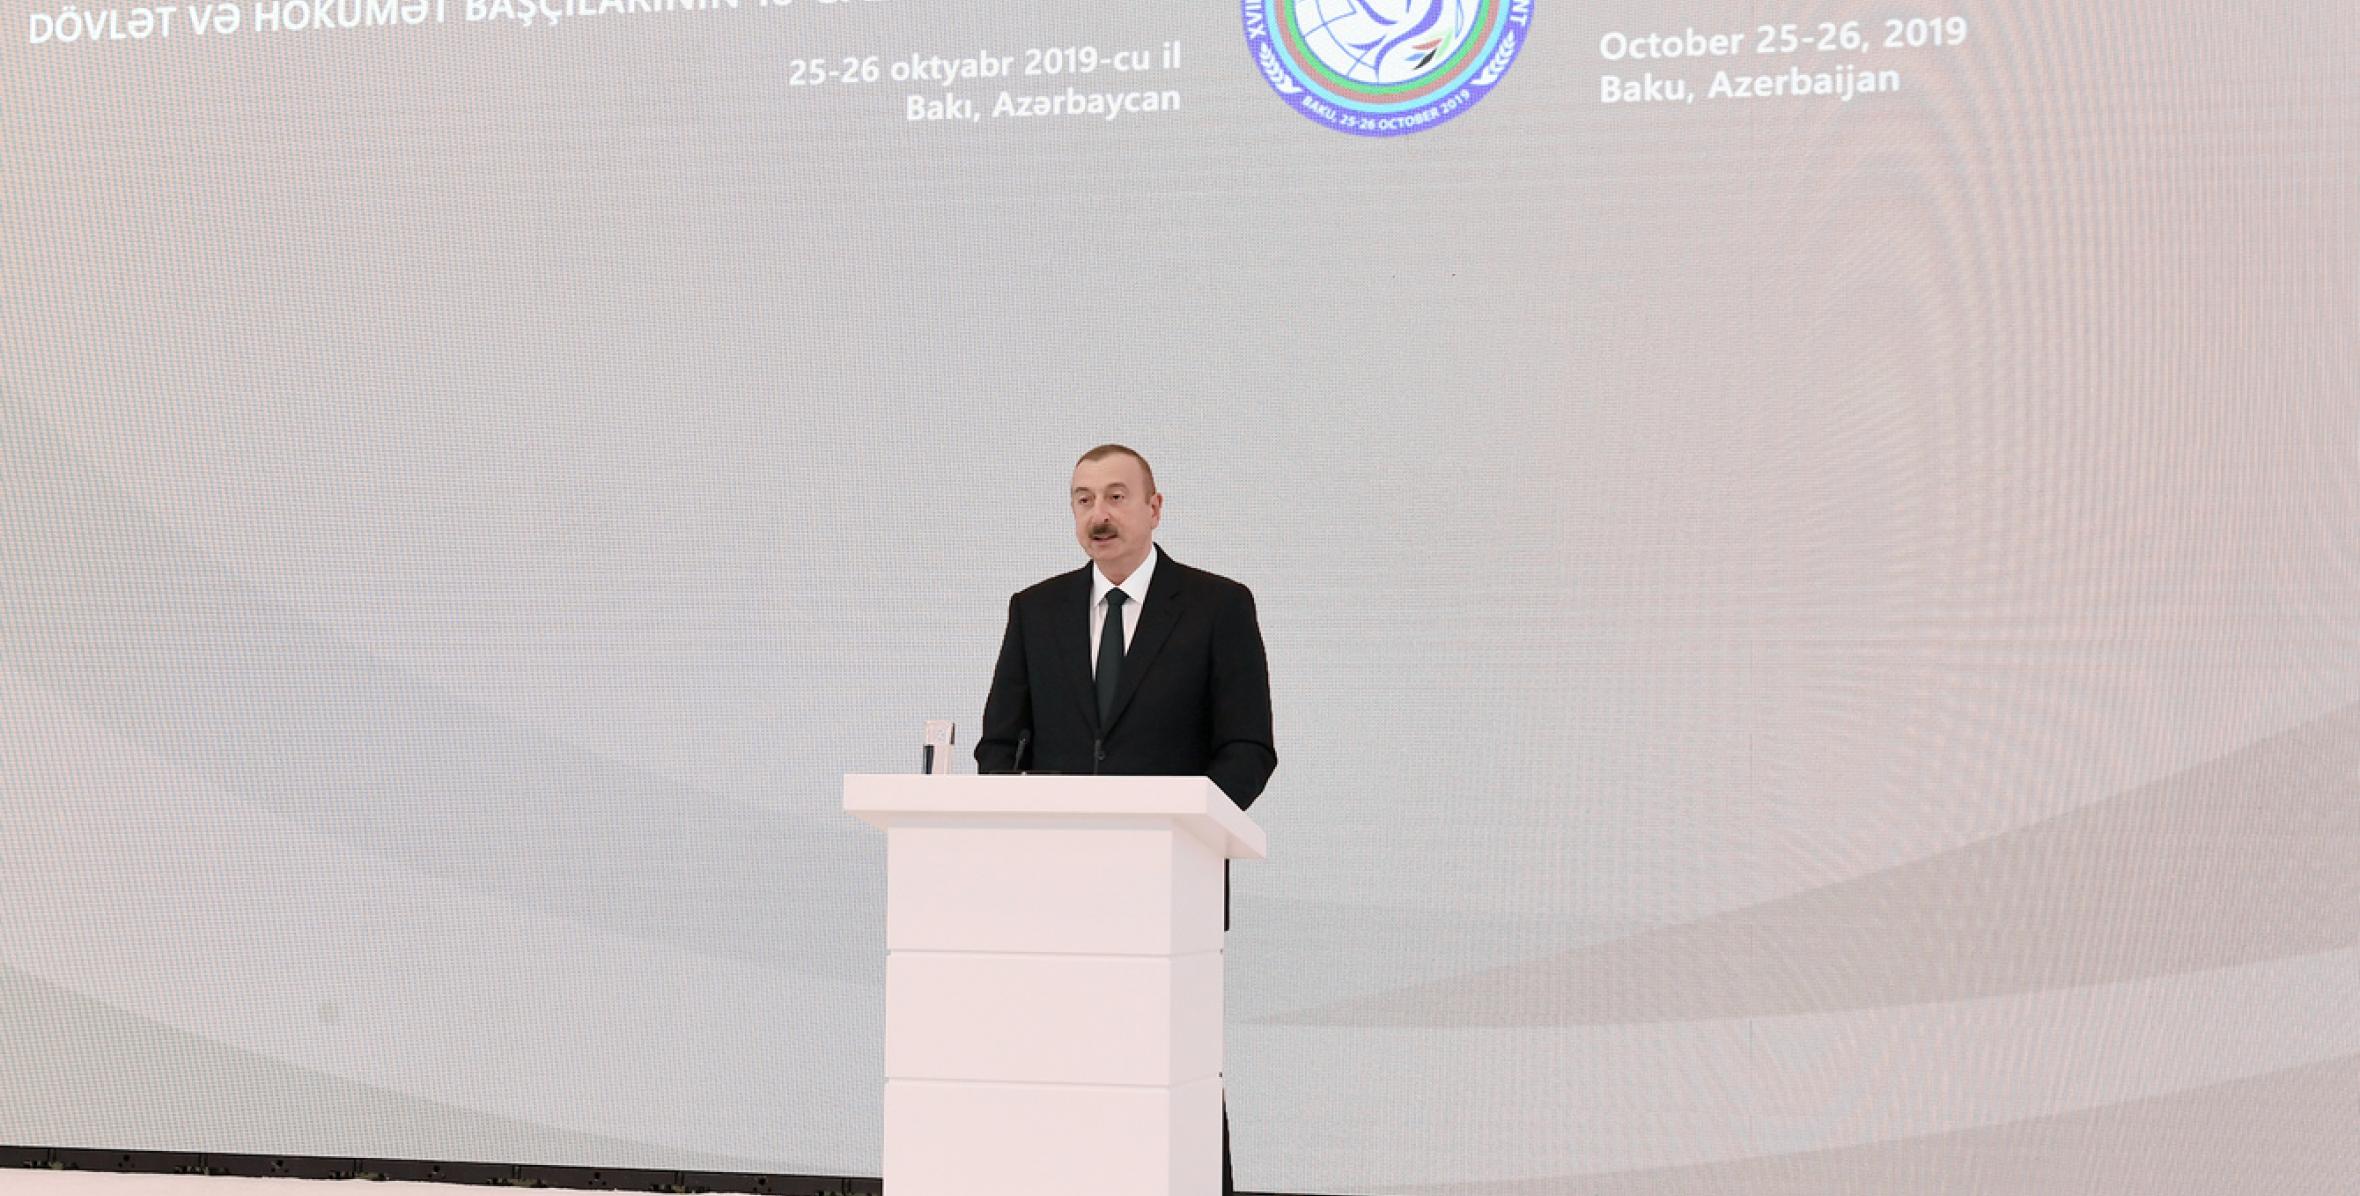 Speech by Ilham Aliyev at the official reception in honor of heads of state and government participating in Baku Summit